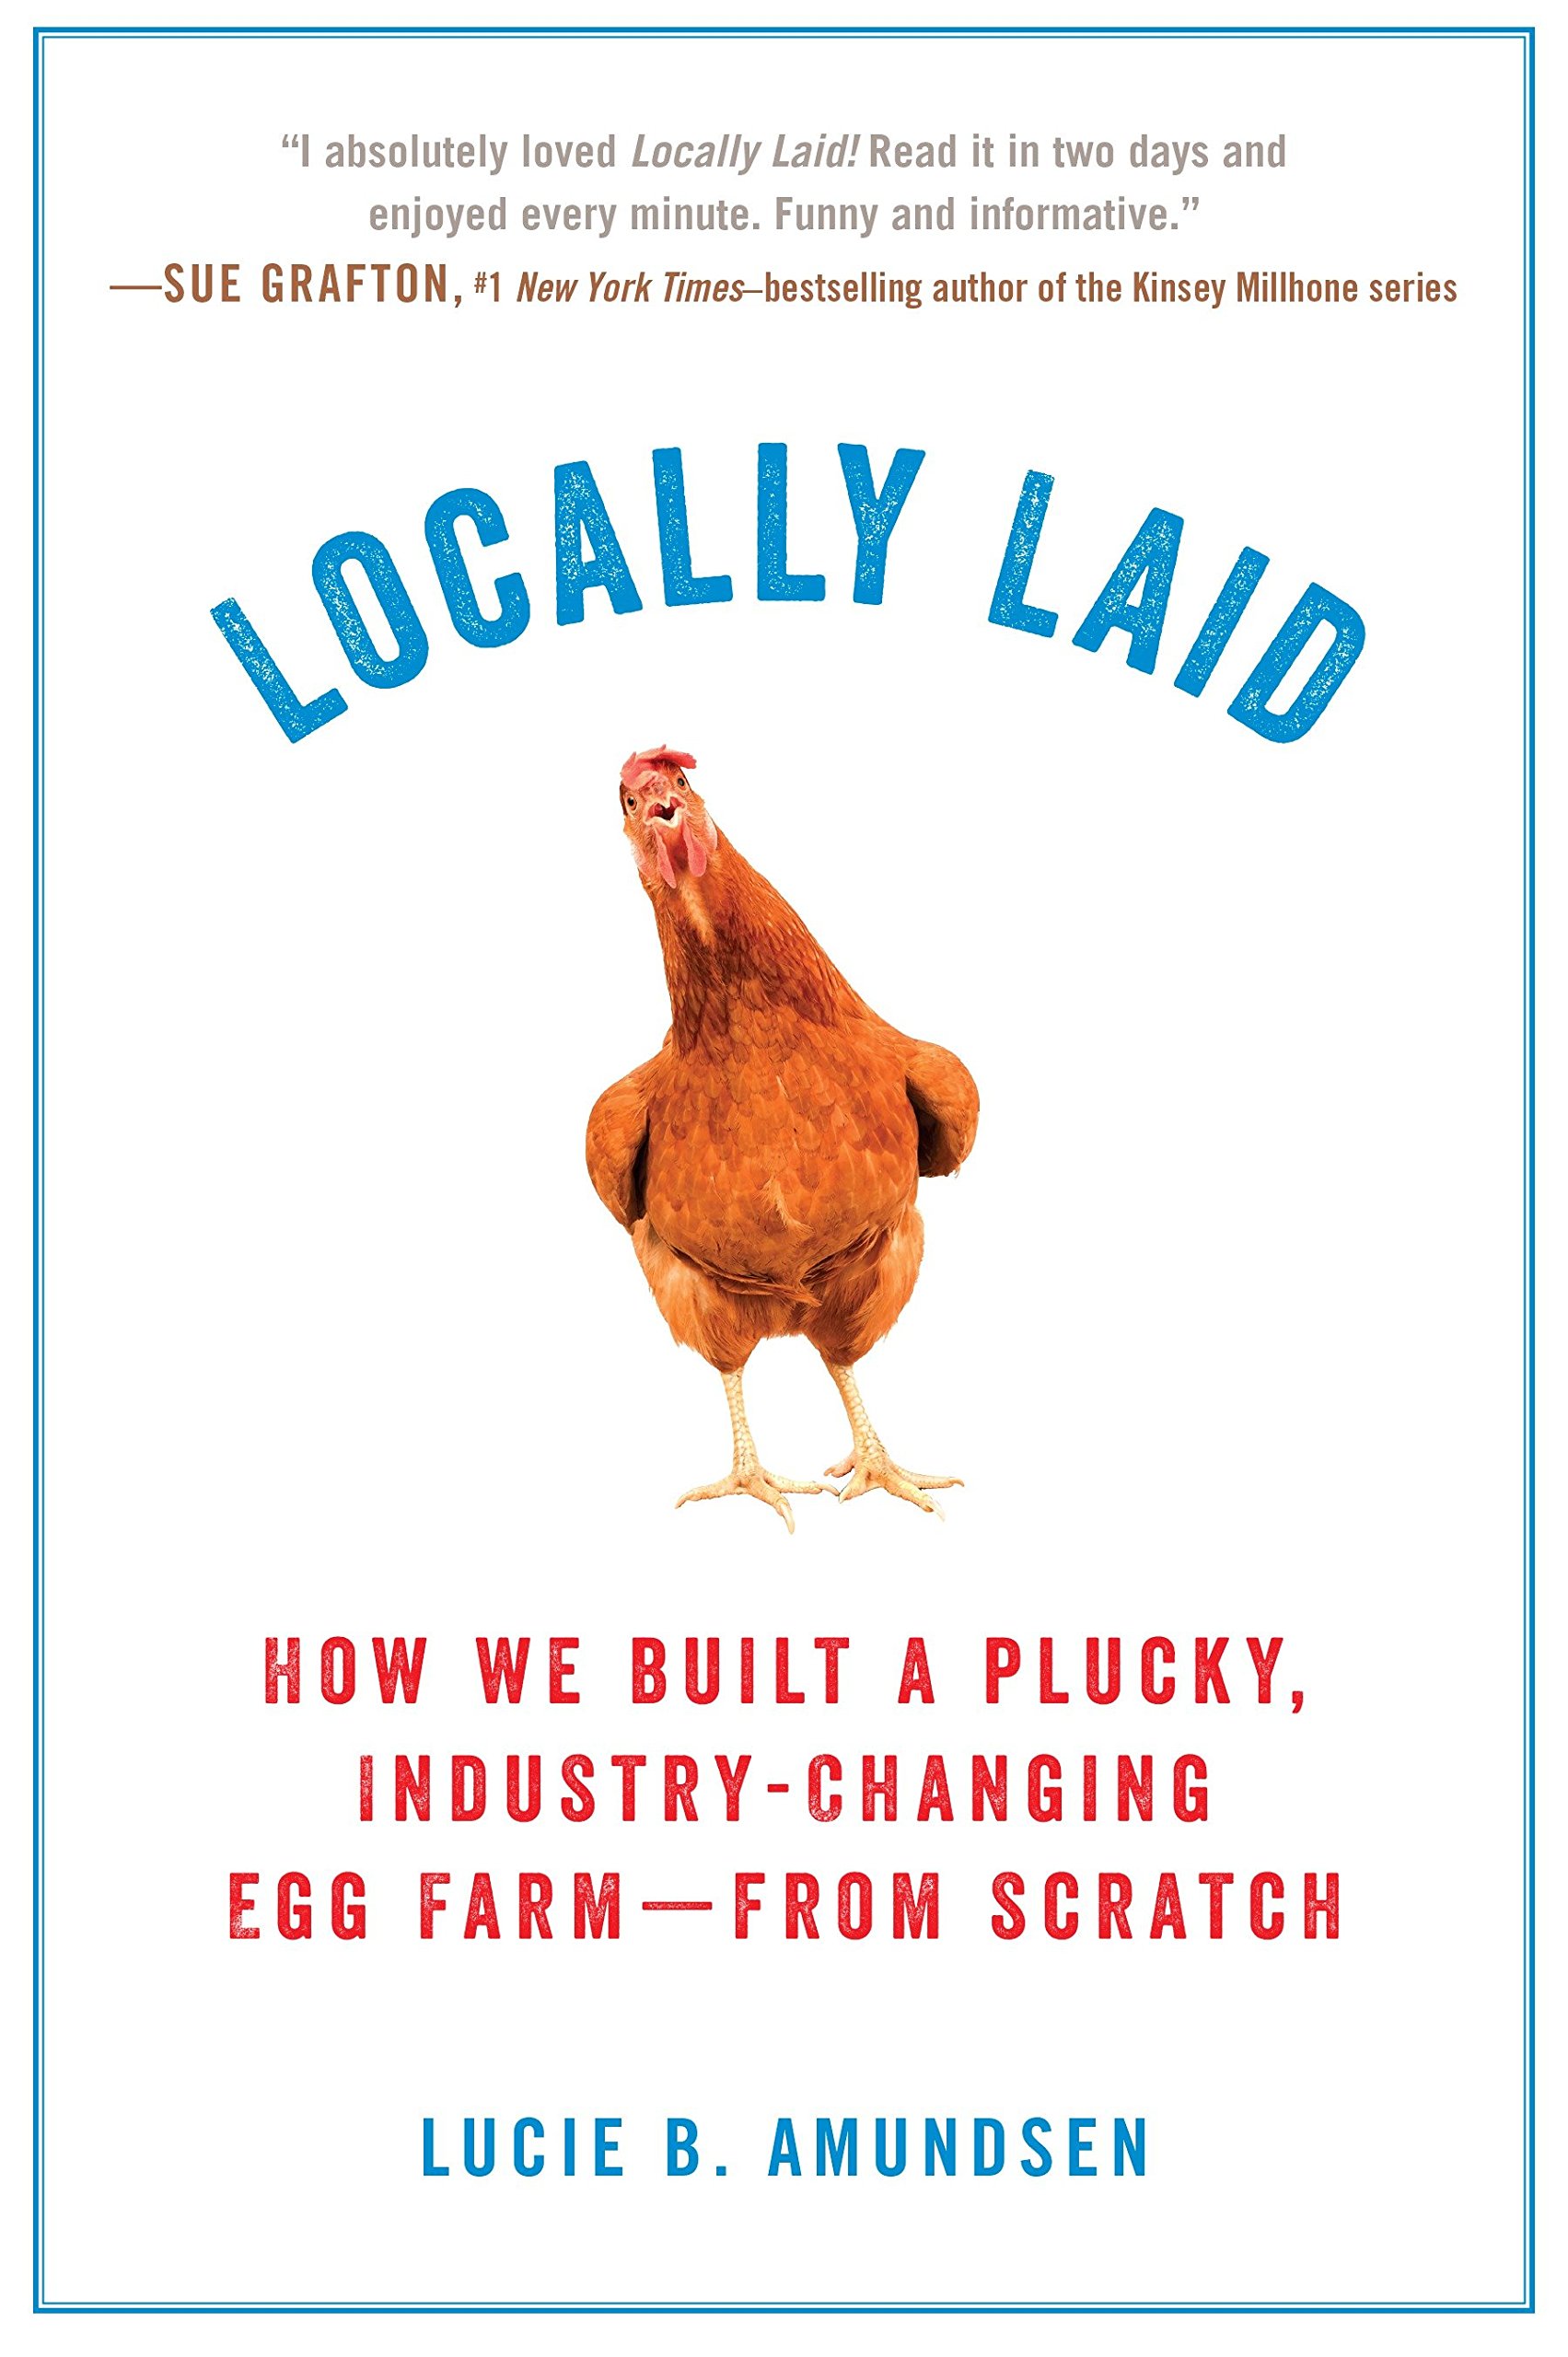 Locally Laid: How We Built a Plucky, Industry-Changing Egg Farm-From Scratch